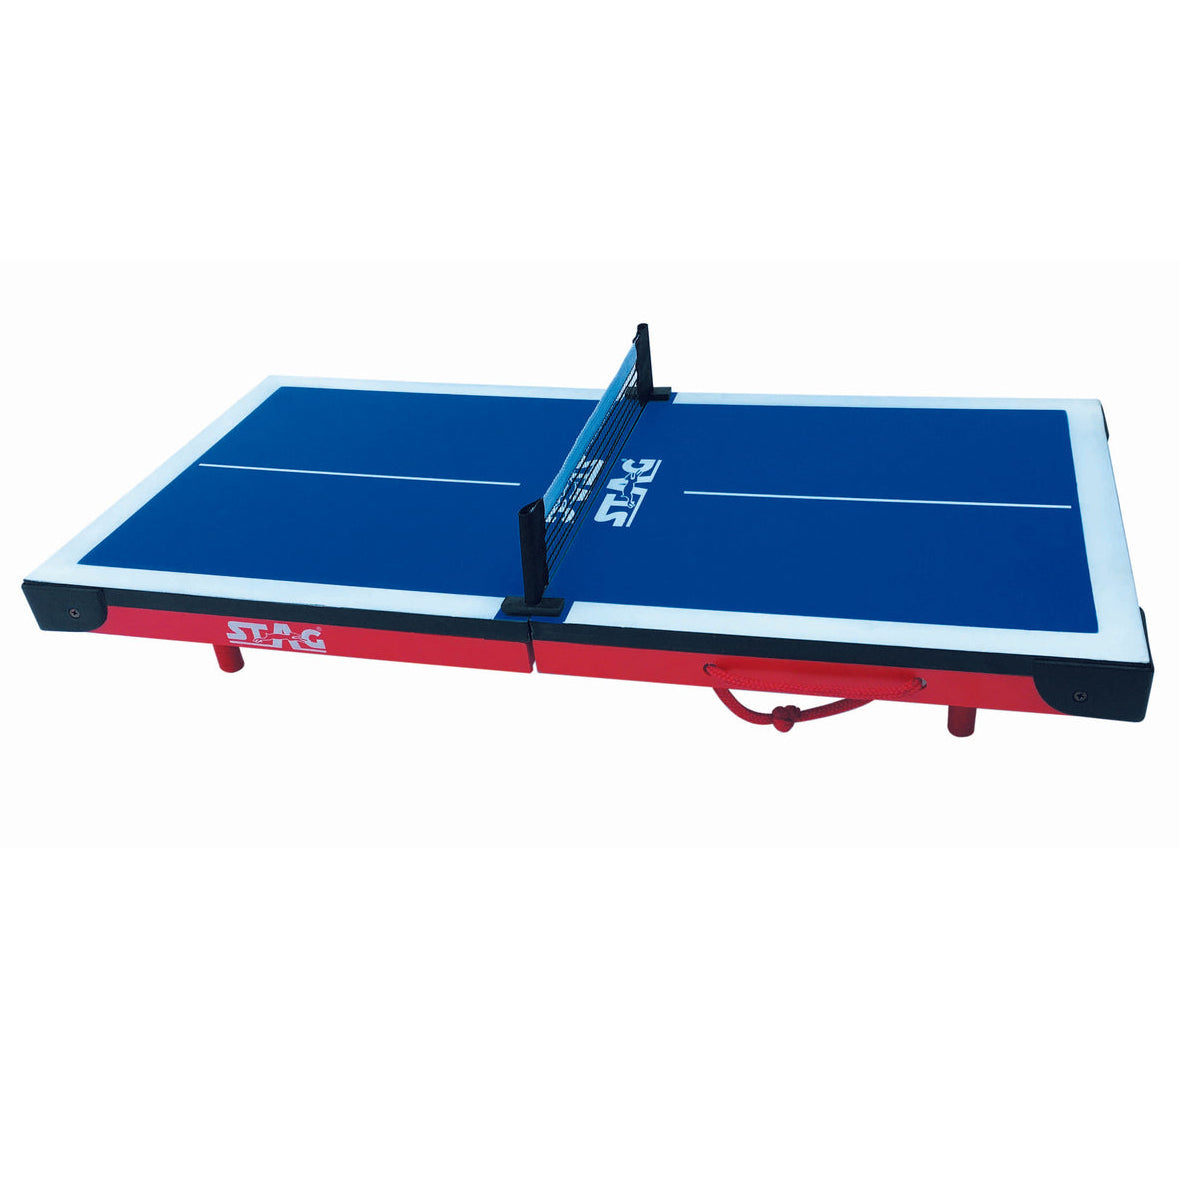 Mini Fun Table Tennis Table By STAG